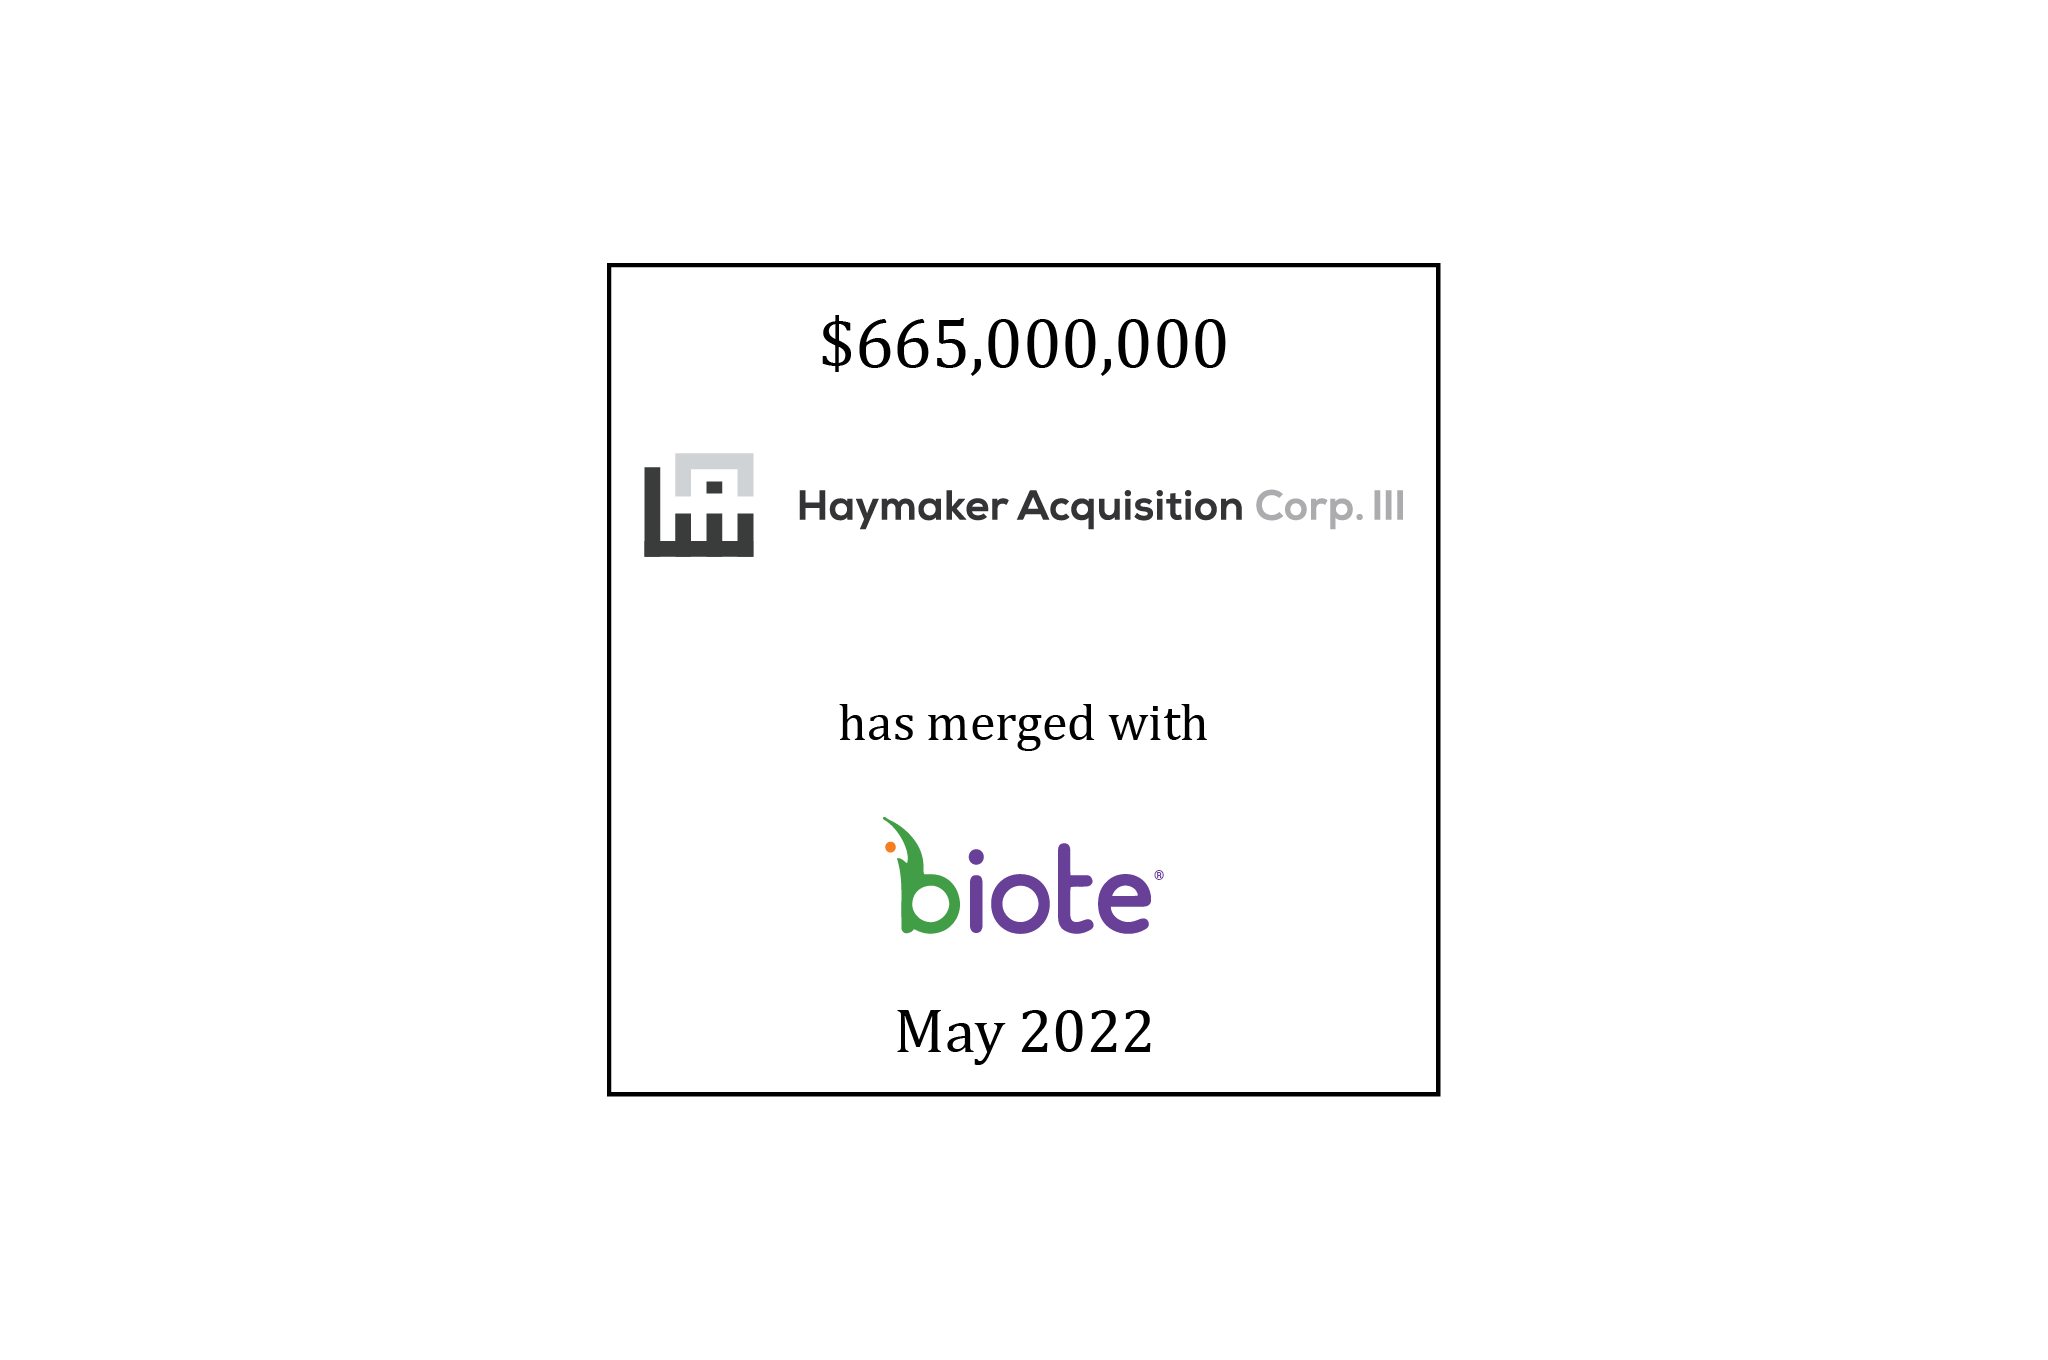 $677,000,000 | Haymaker Acquisition Corp. III (logo) has merged with Biote (logo) | May 2022